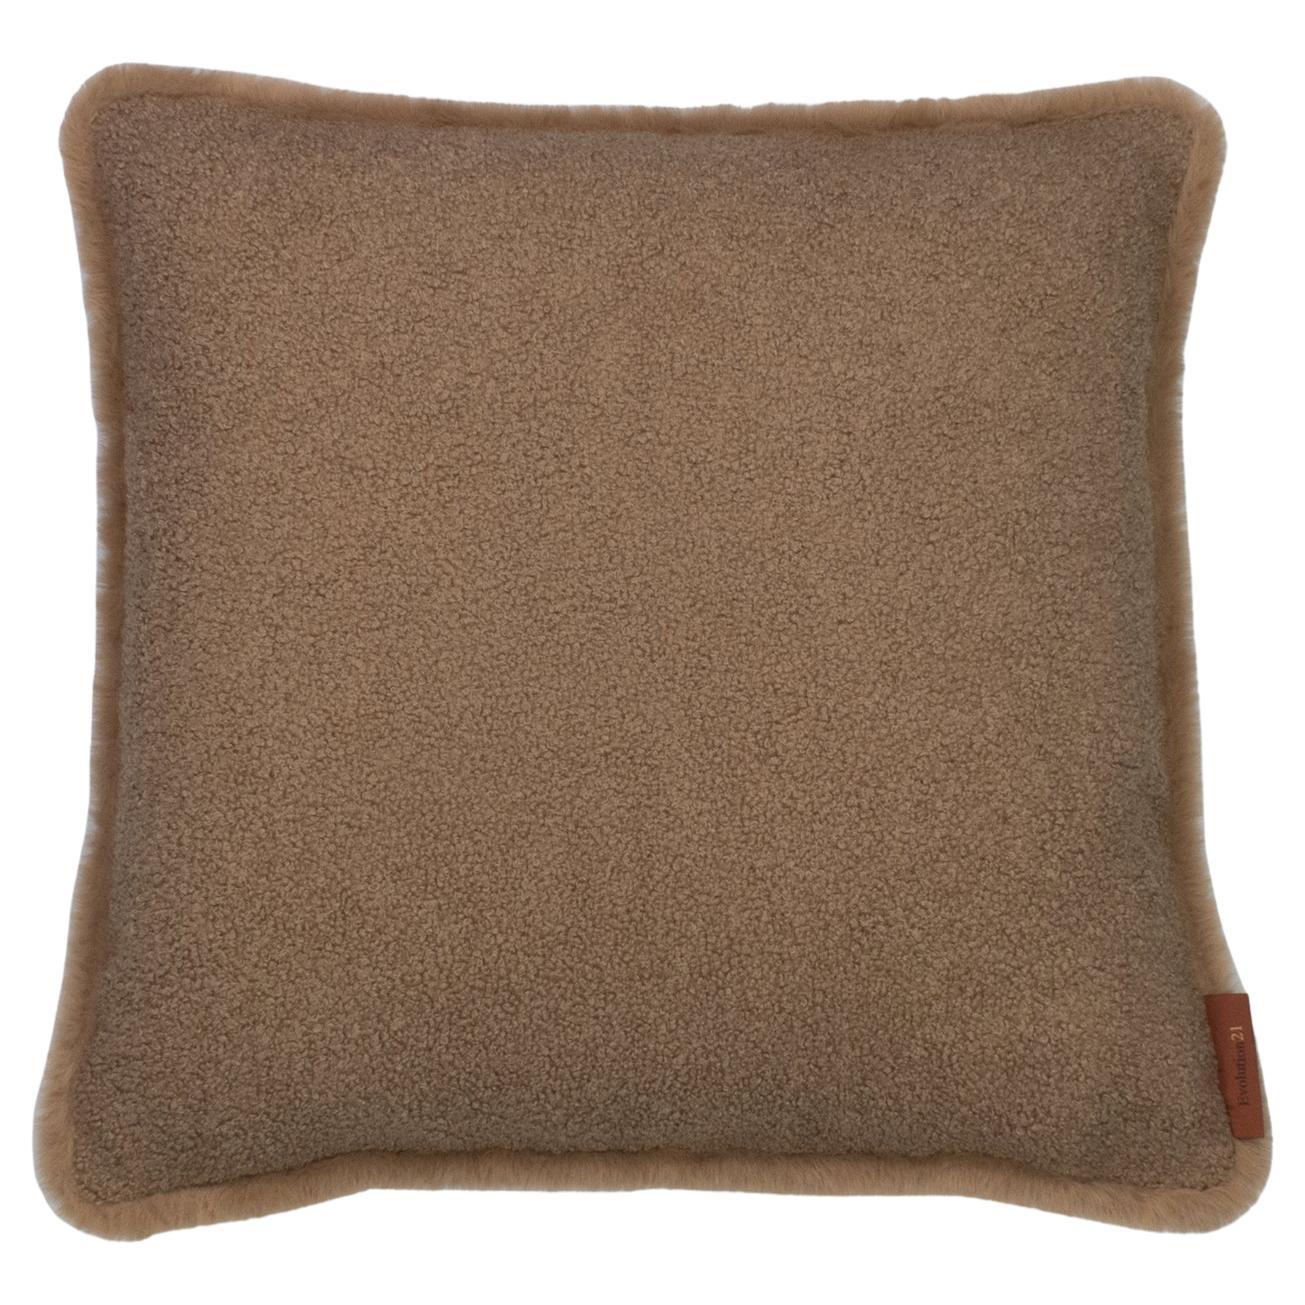 Modern Textured Throw Pillow Tiramisu Brown "Bubble Lux" by Evolution21 For Sale